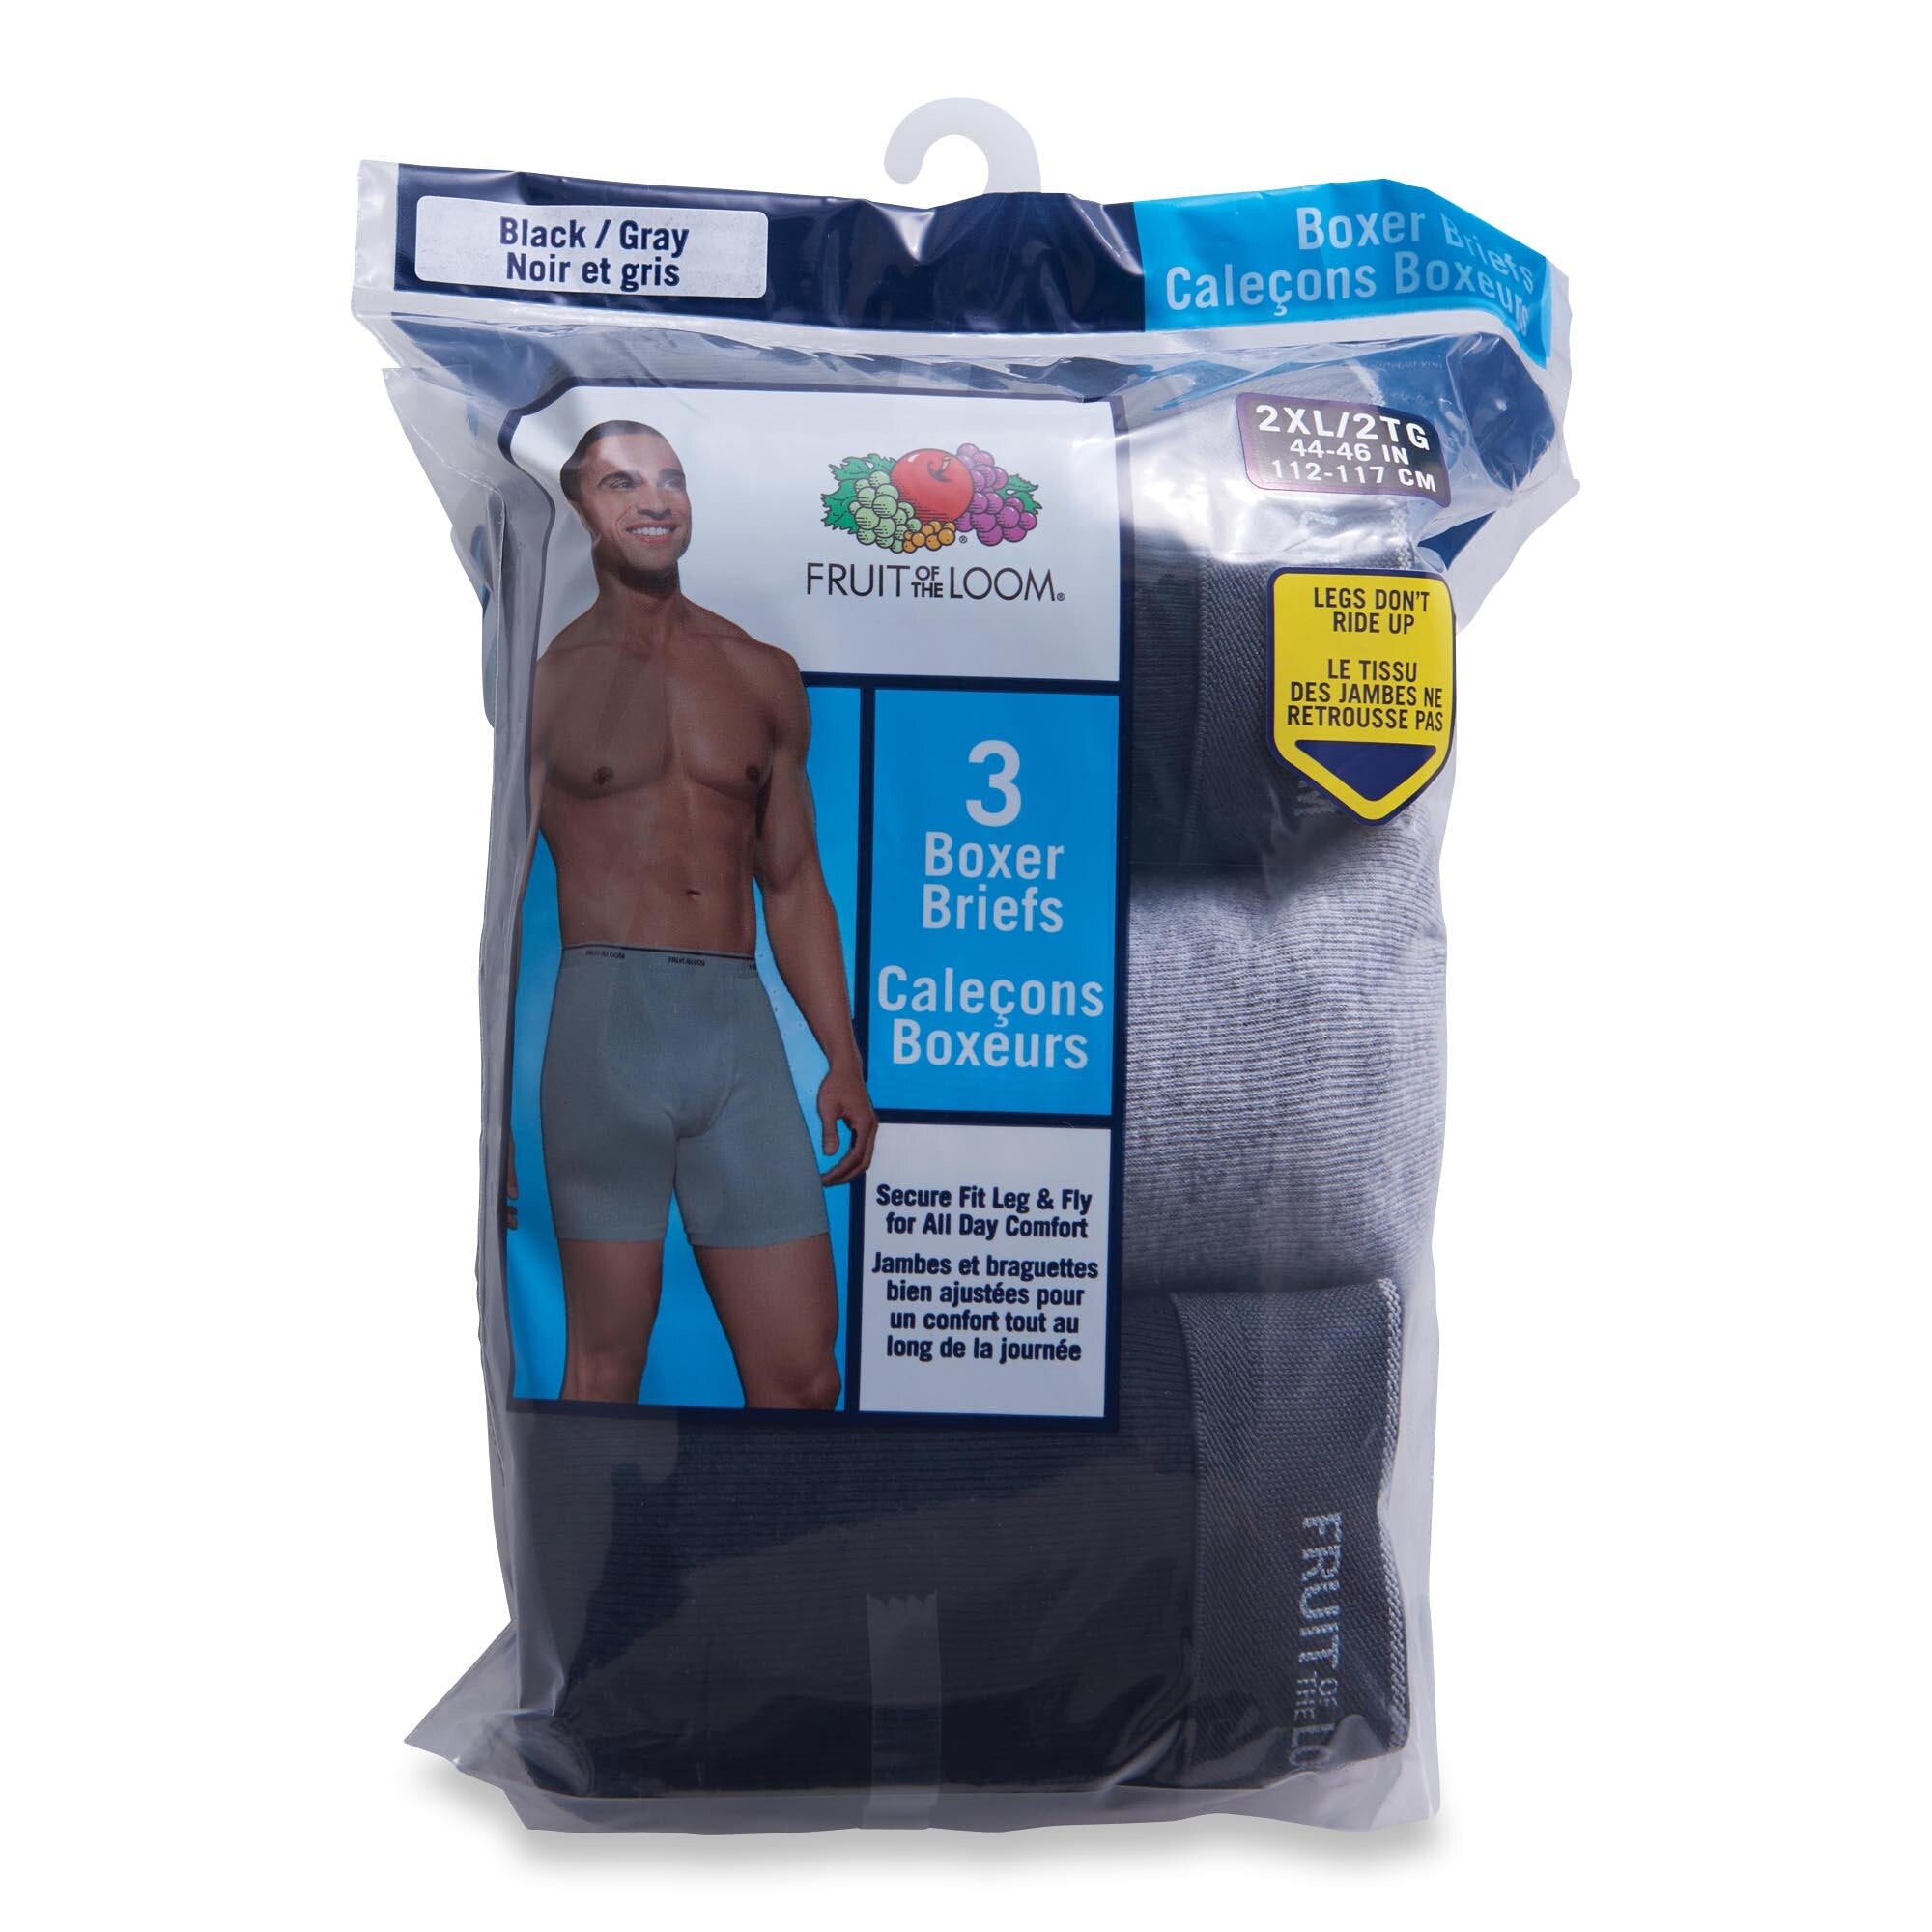 Fruit of the Loom Men's Tag-Free Comfort Briefs, 2XL, Assorted